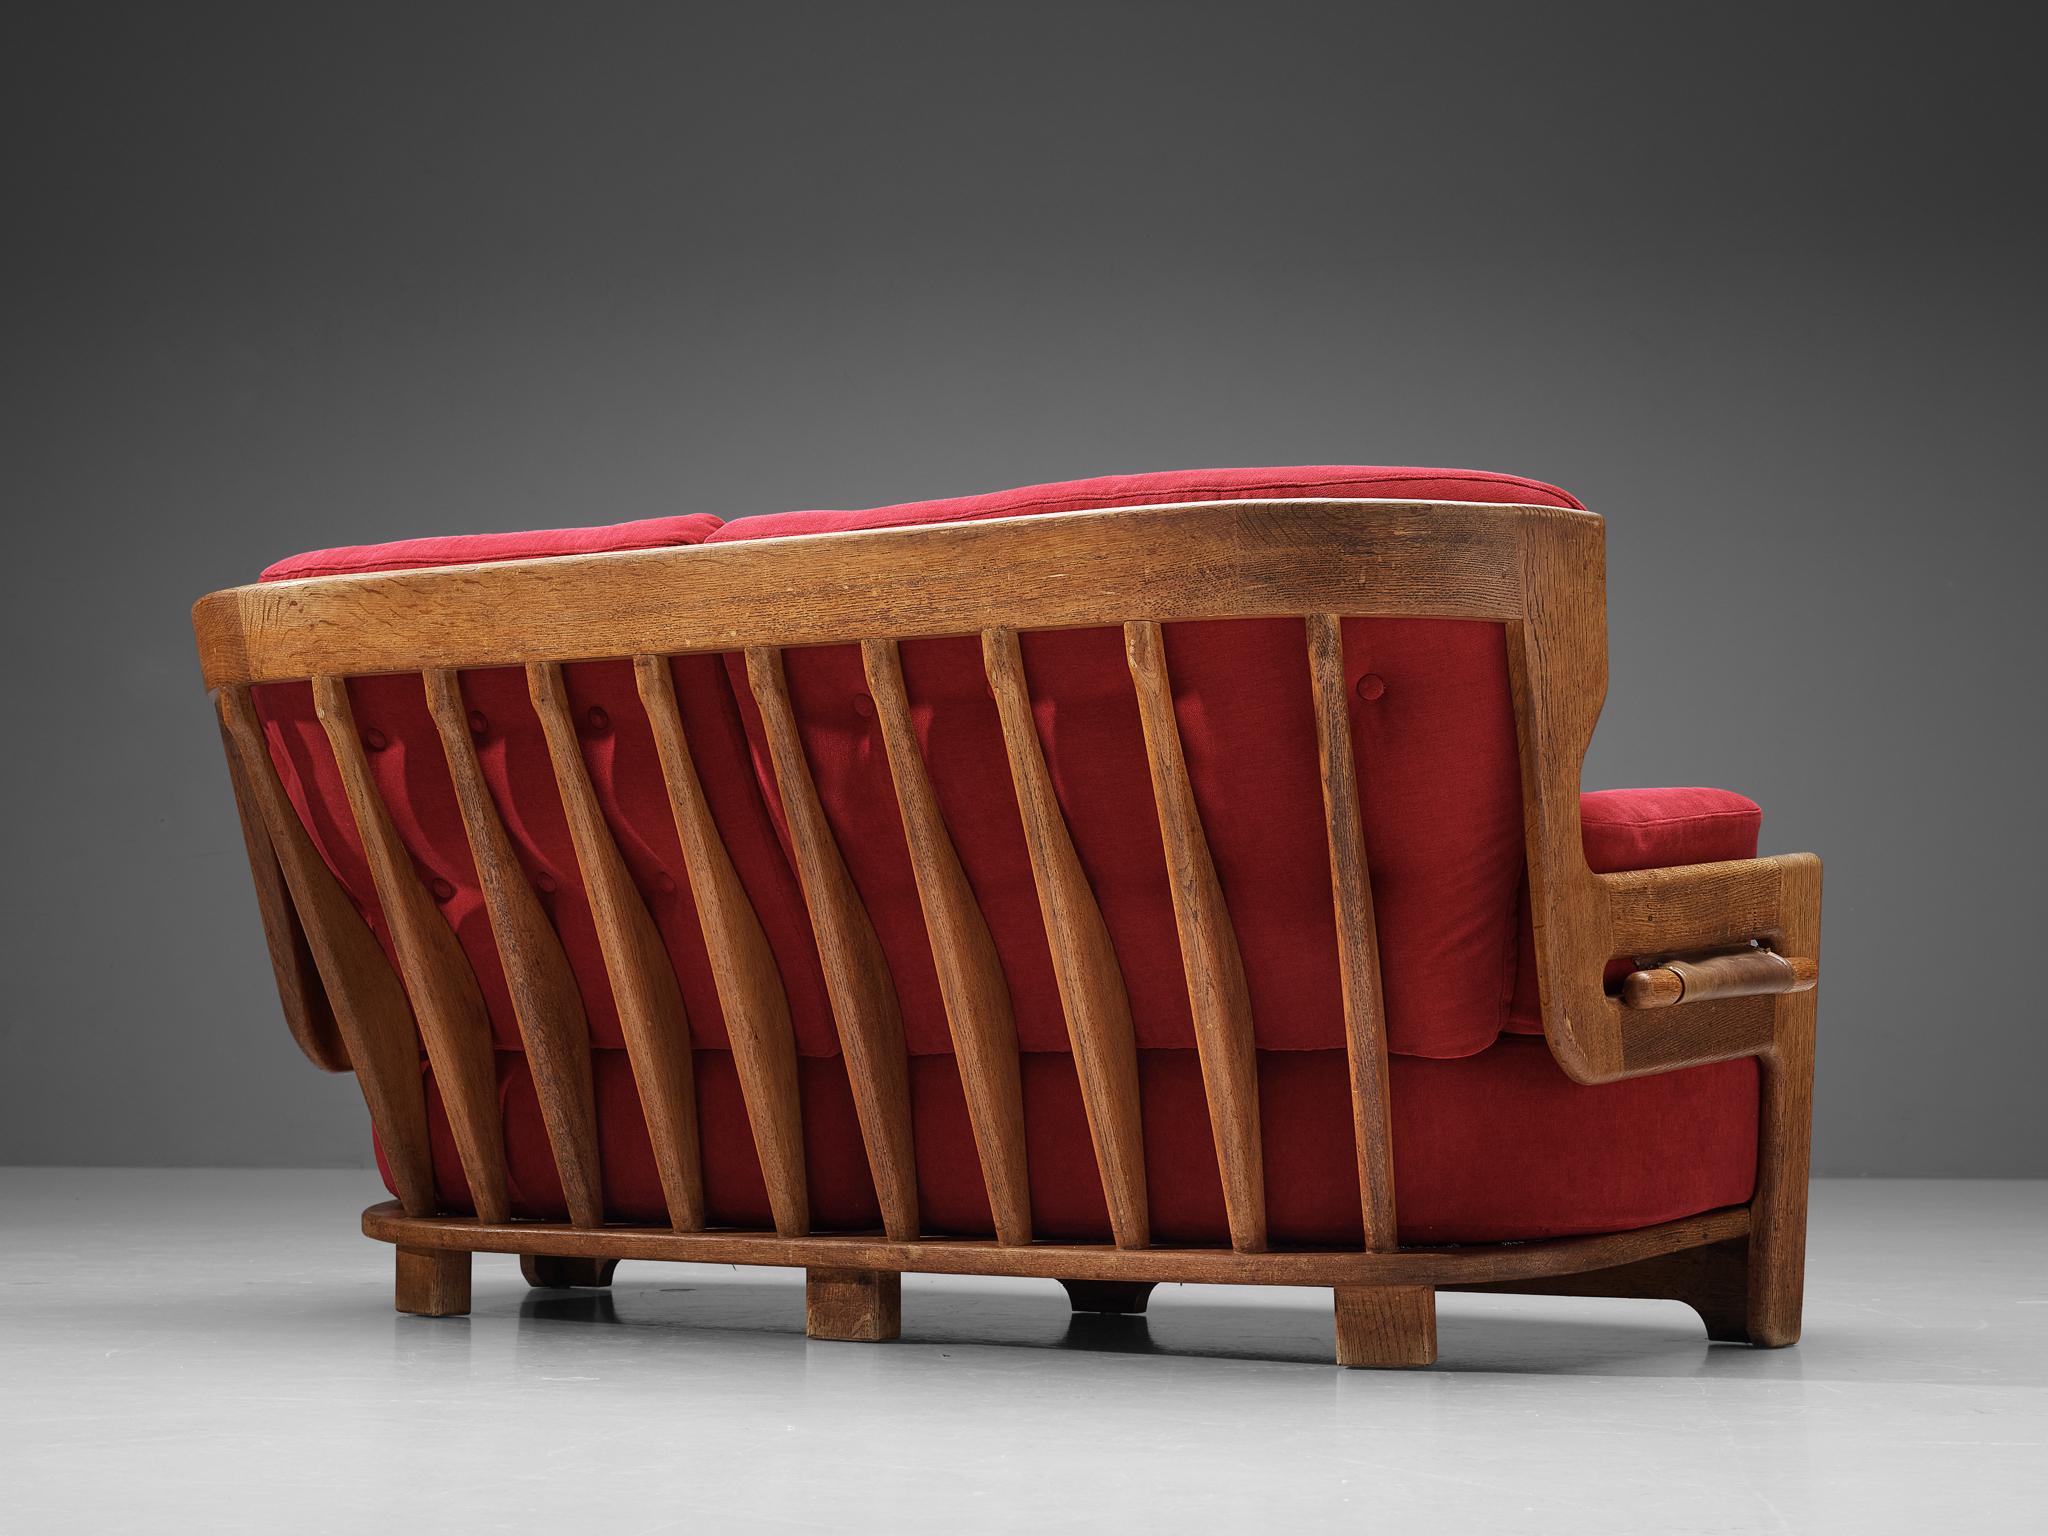 Guillerme & Chambron for Votre Maison, sofa model 'Denis', velvet, oak, leather France, 1960s

Extraordinary Guillerme and Chambron sofa in solid oak with the typical characteristic decorative details at the back and capricious forms of the legs.